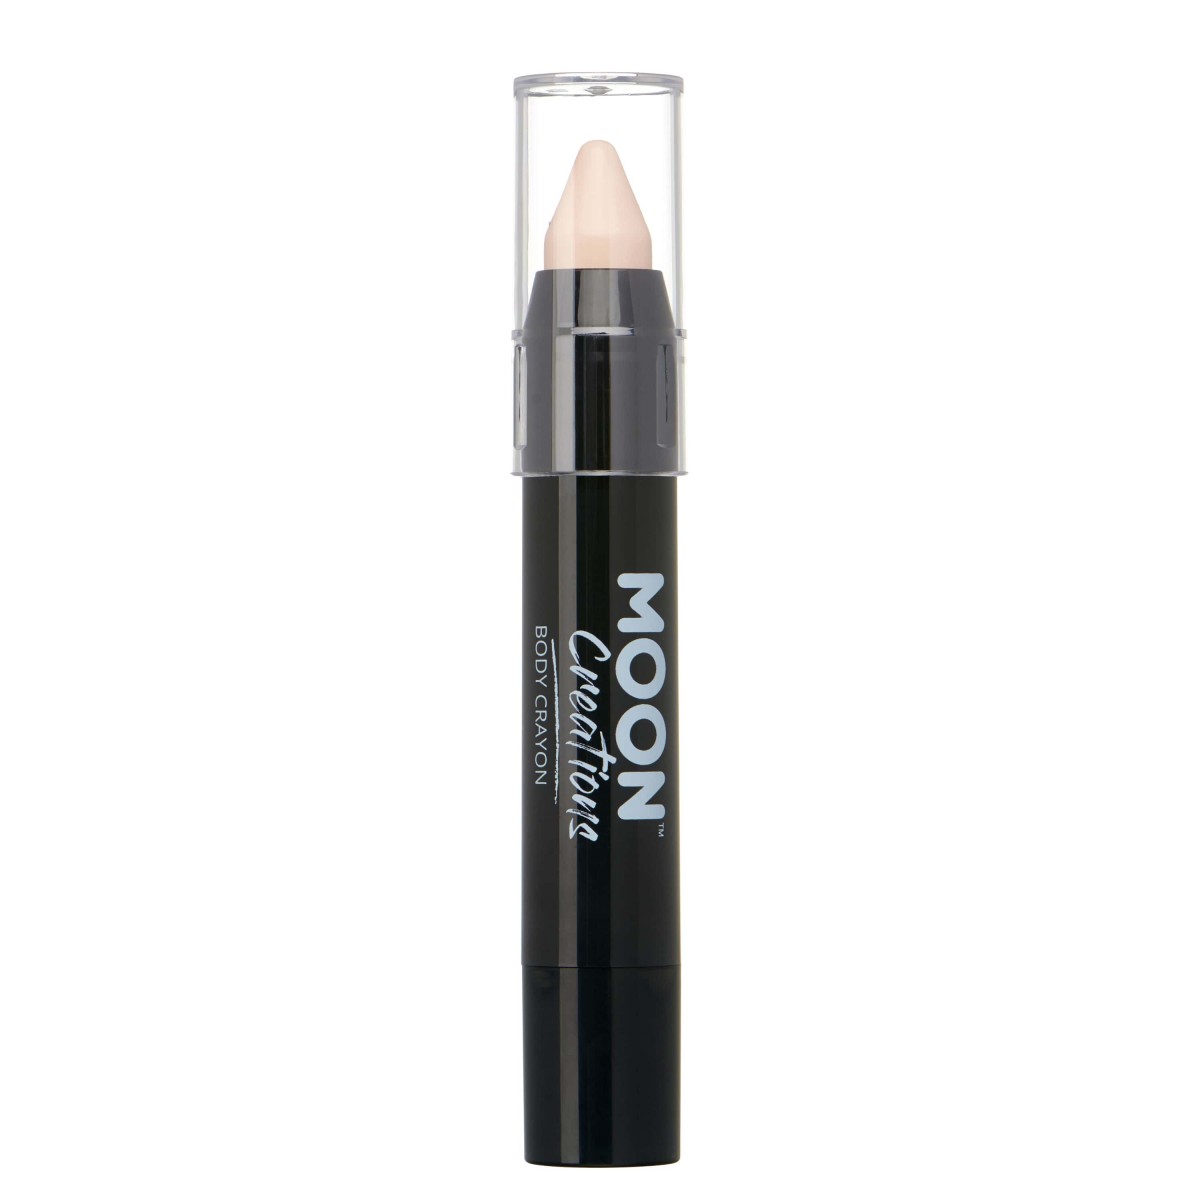 MOON CREATIONS C3 FACE & BODY CRAYON PALE SKIN 3.2g